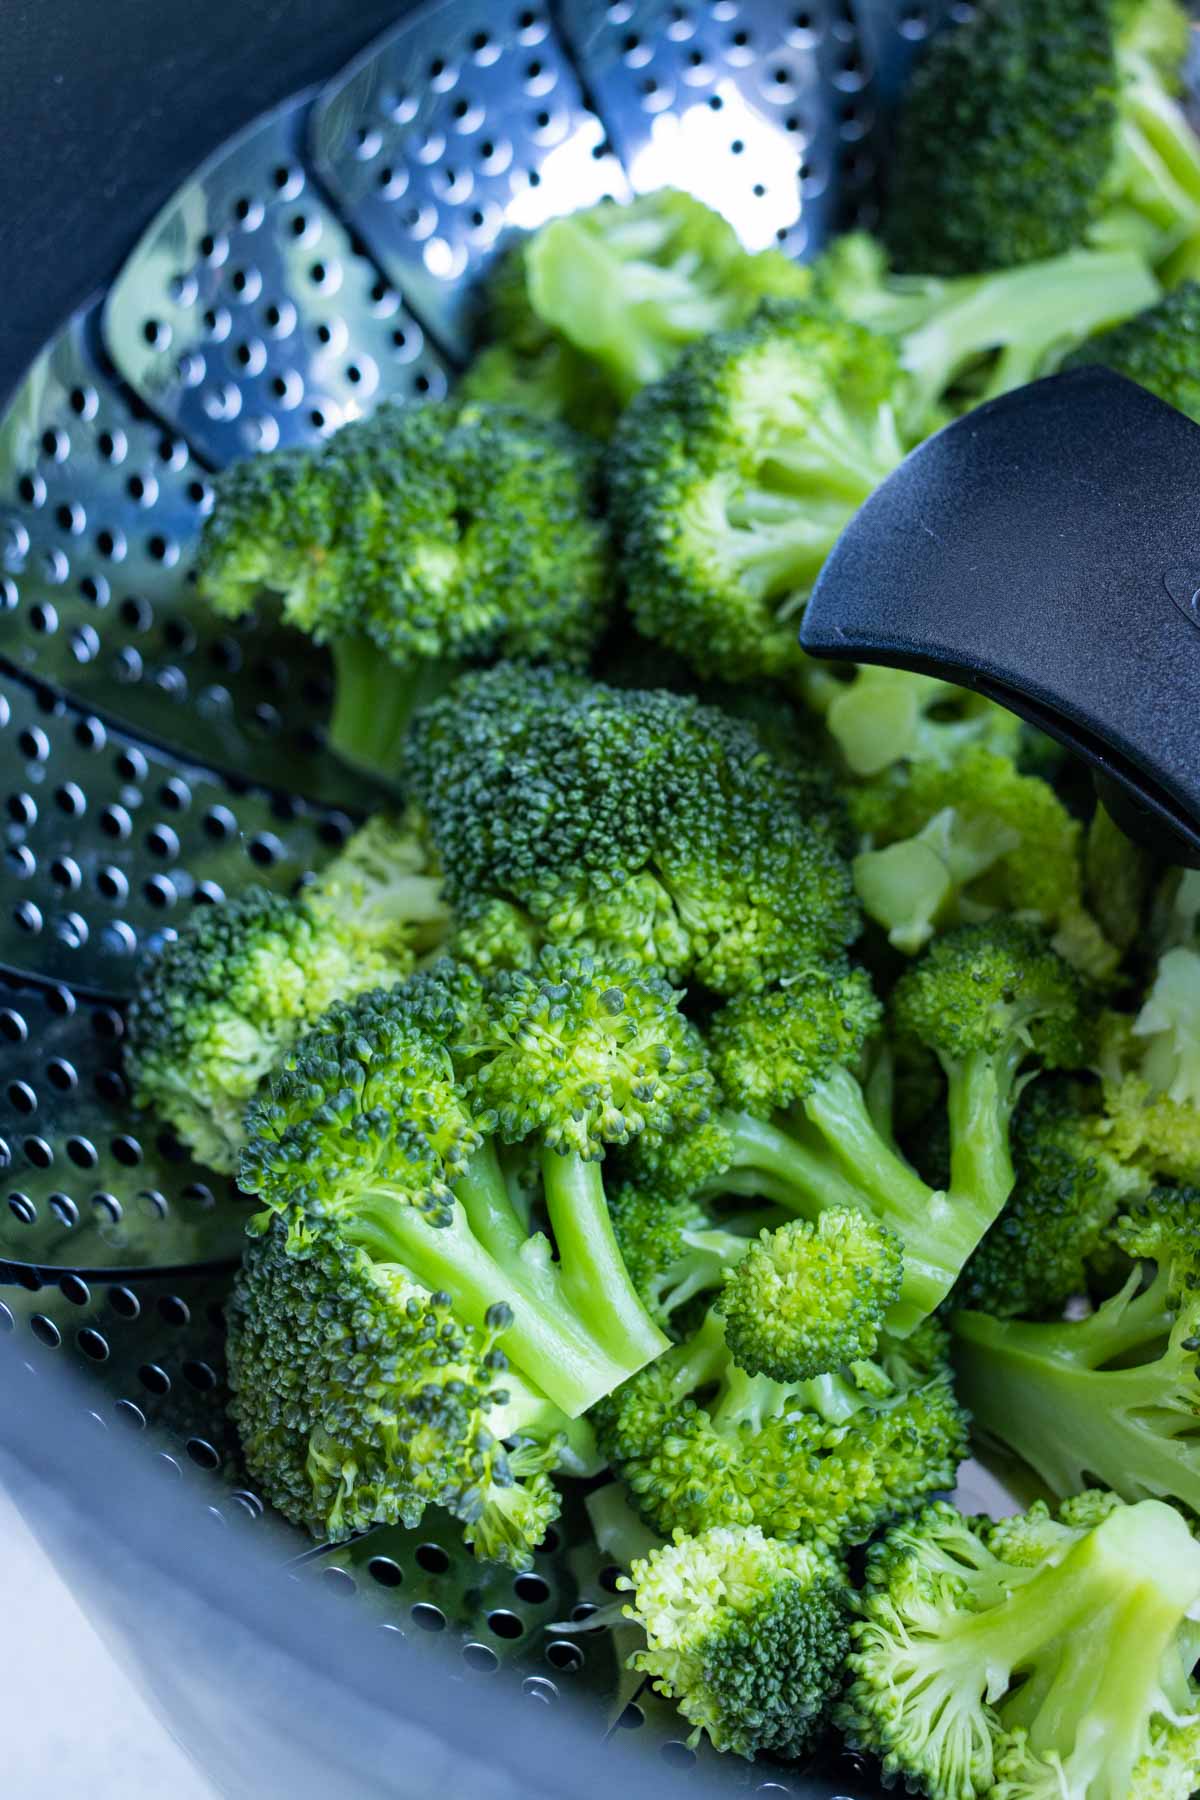 Broccoli turns bright green when steamed.